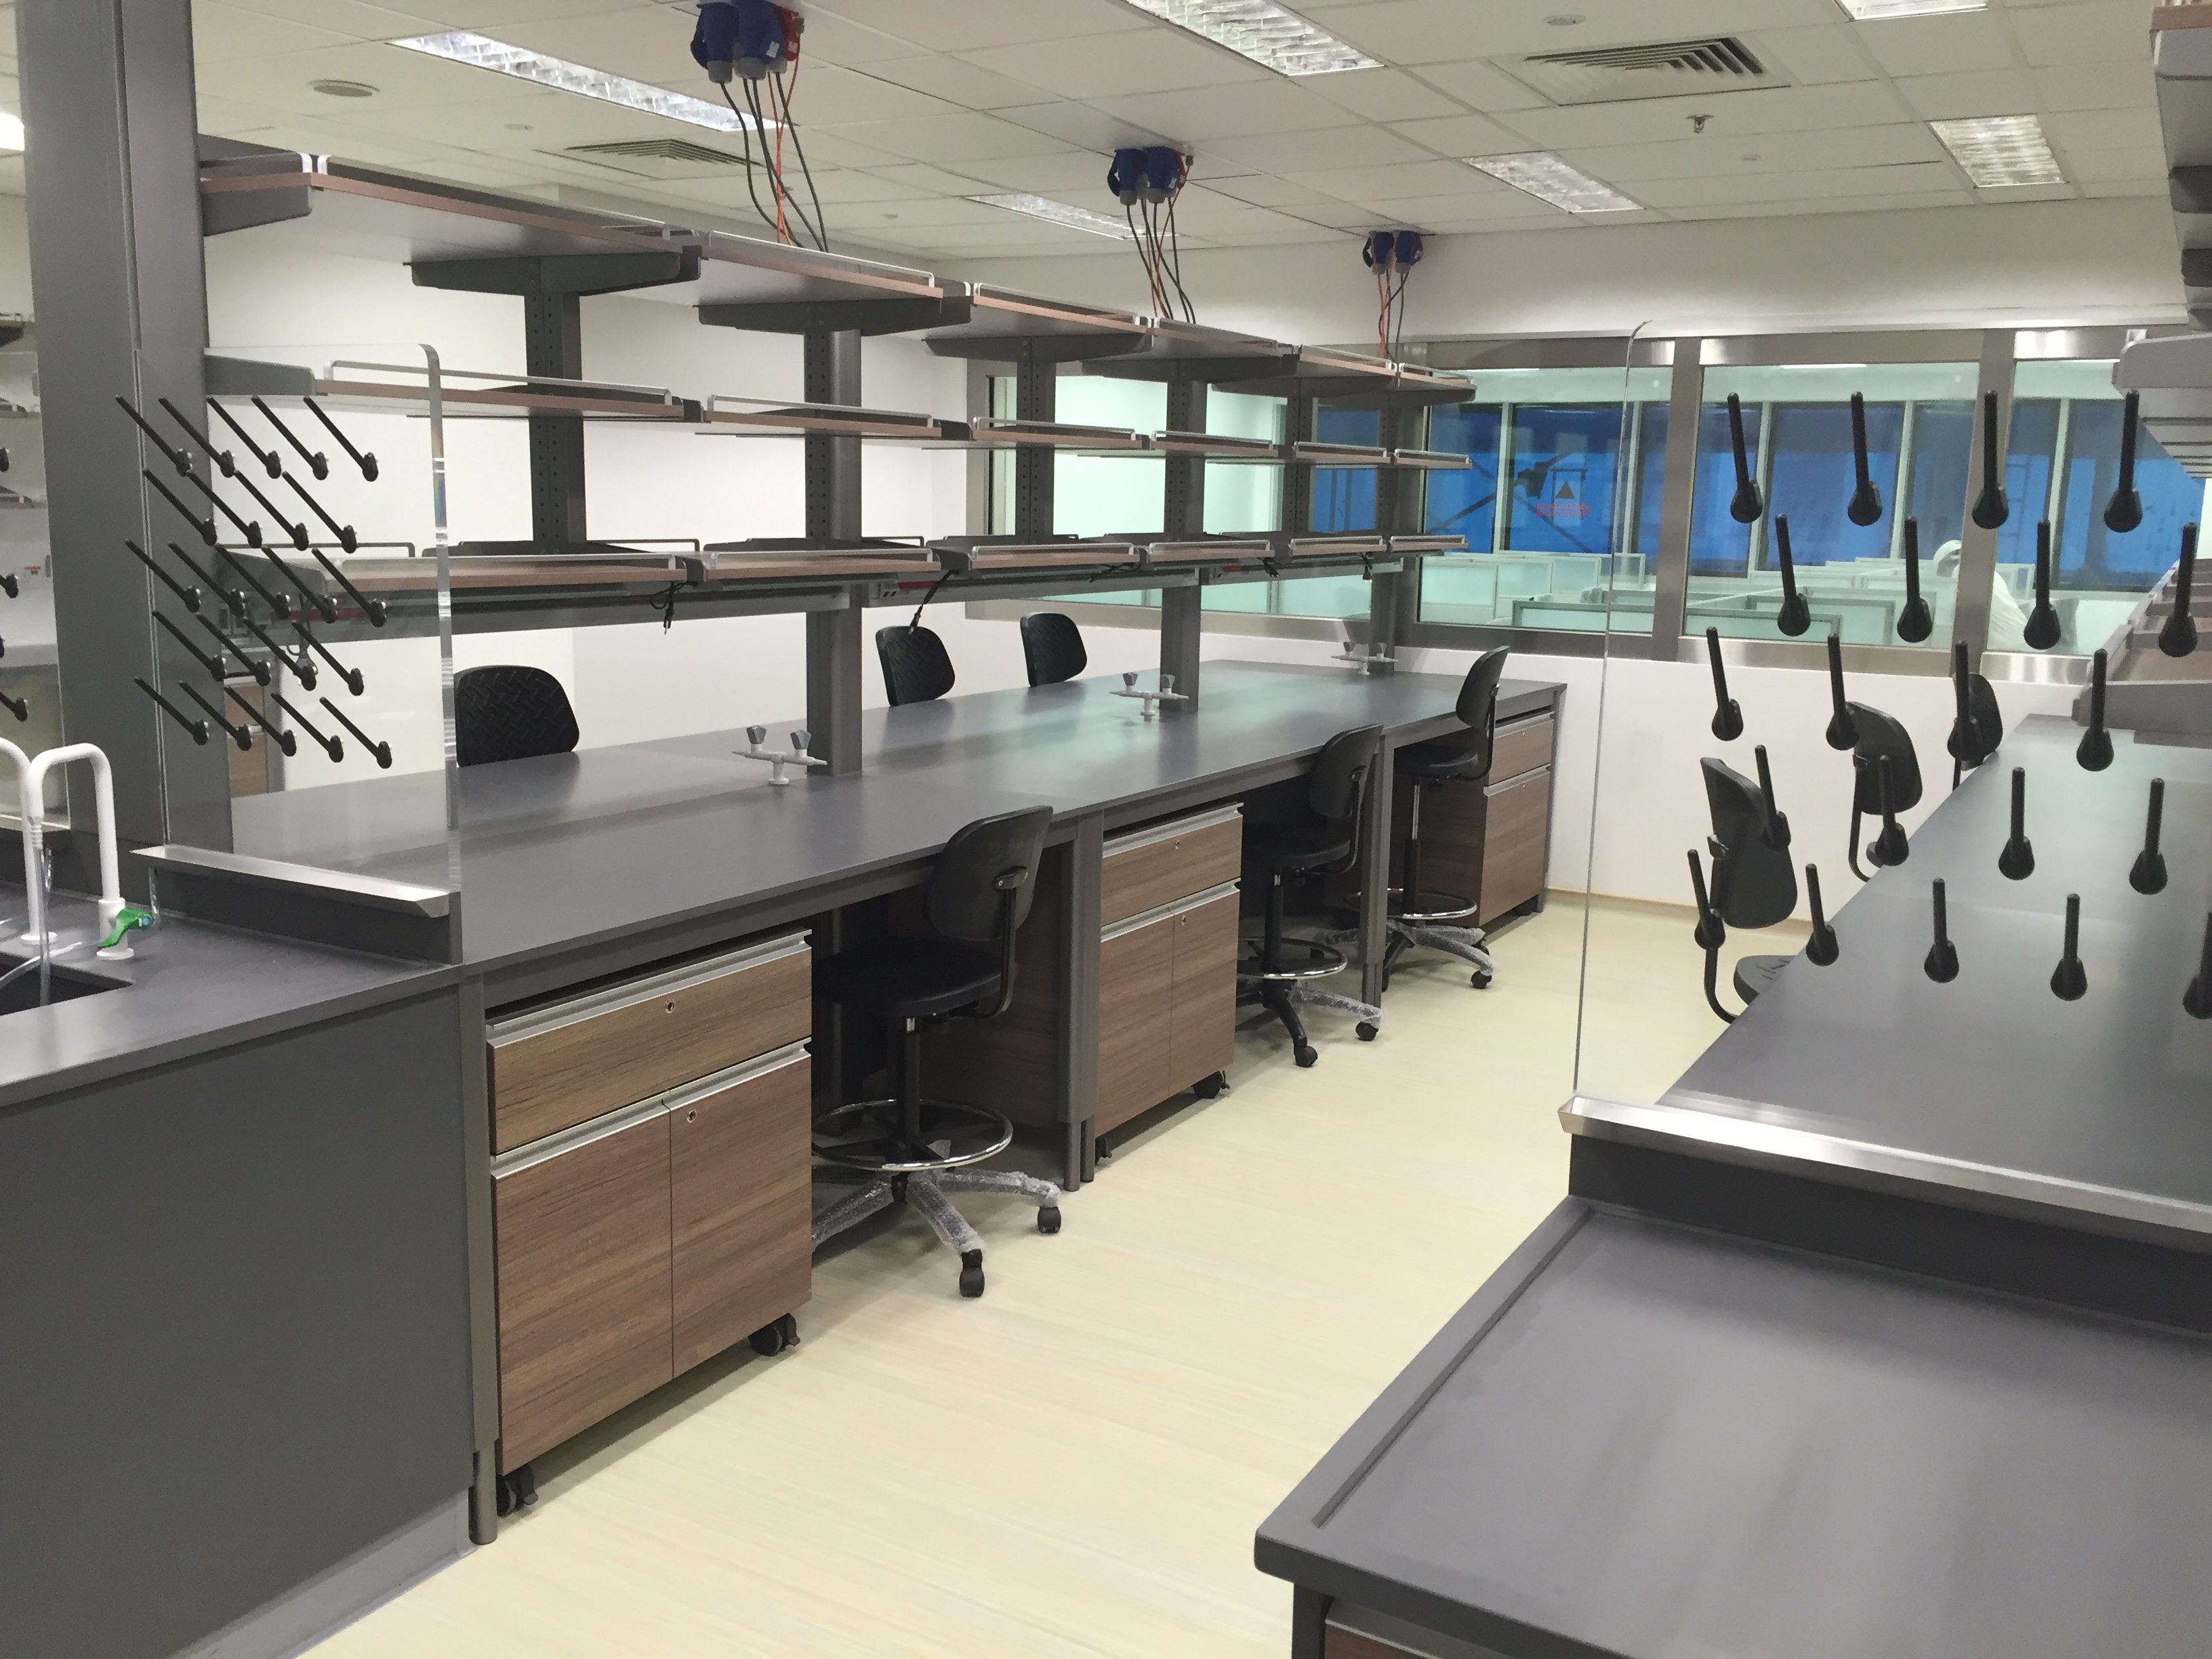 Singapore's Leading Custom-made Laboratory Furniture is expanding all over the middle east dubai qatar kingdom of saudi arabia and the rest of the world